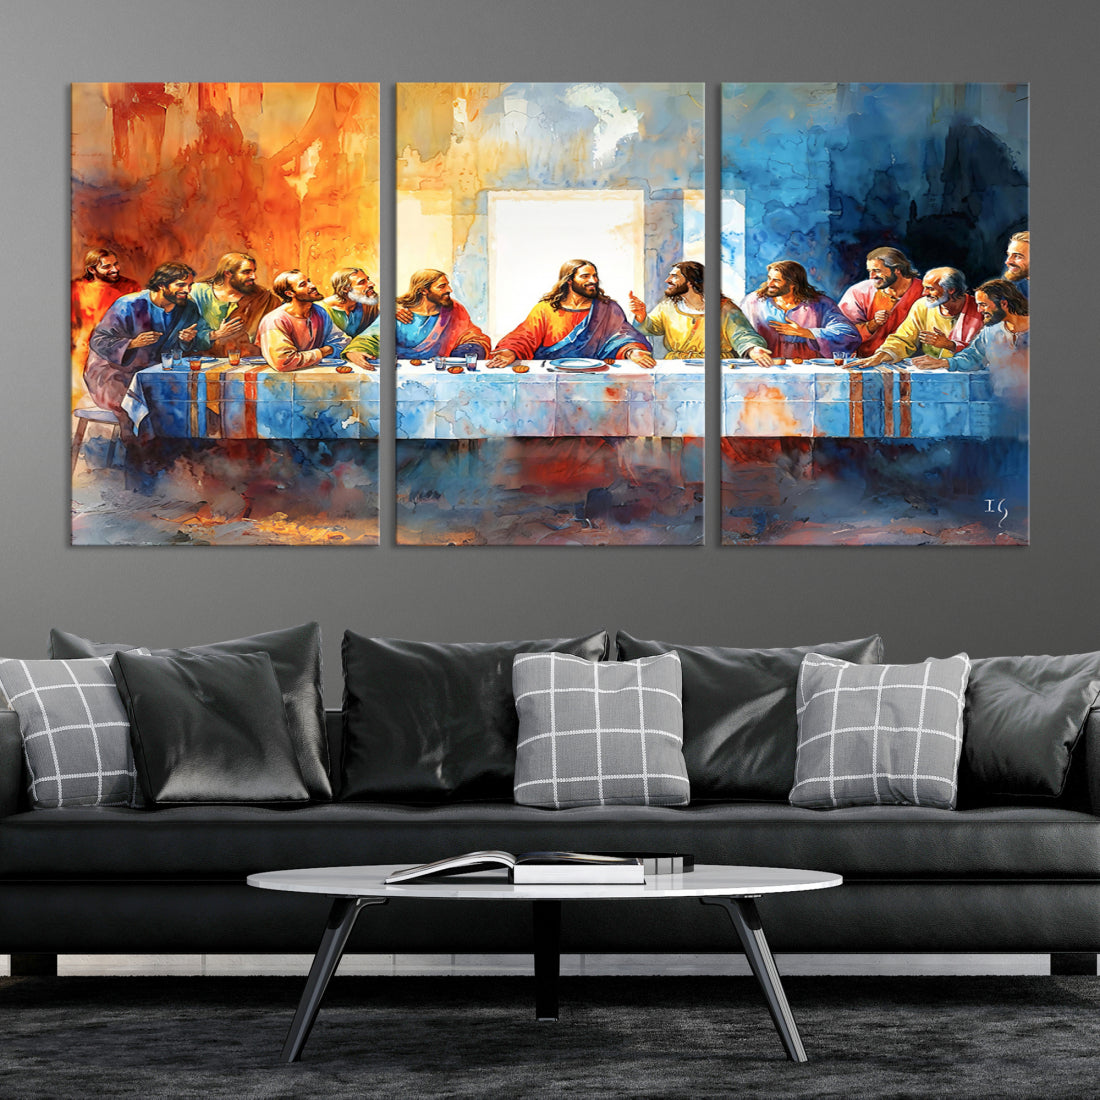 Jesus Christ Wall Art Canvas Print The Last Supper Christian Artwork for Wall Decor